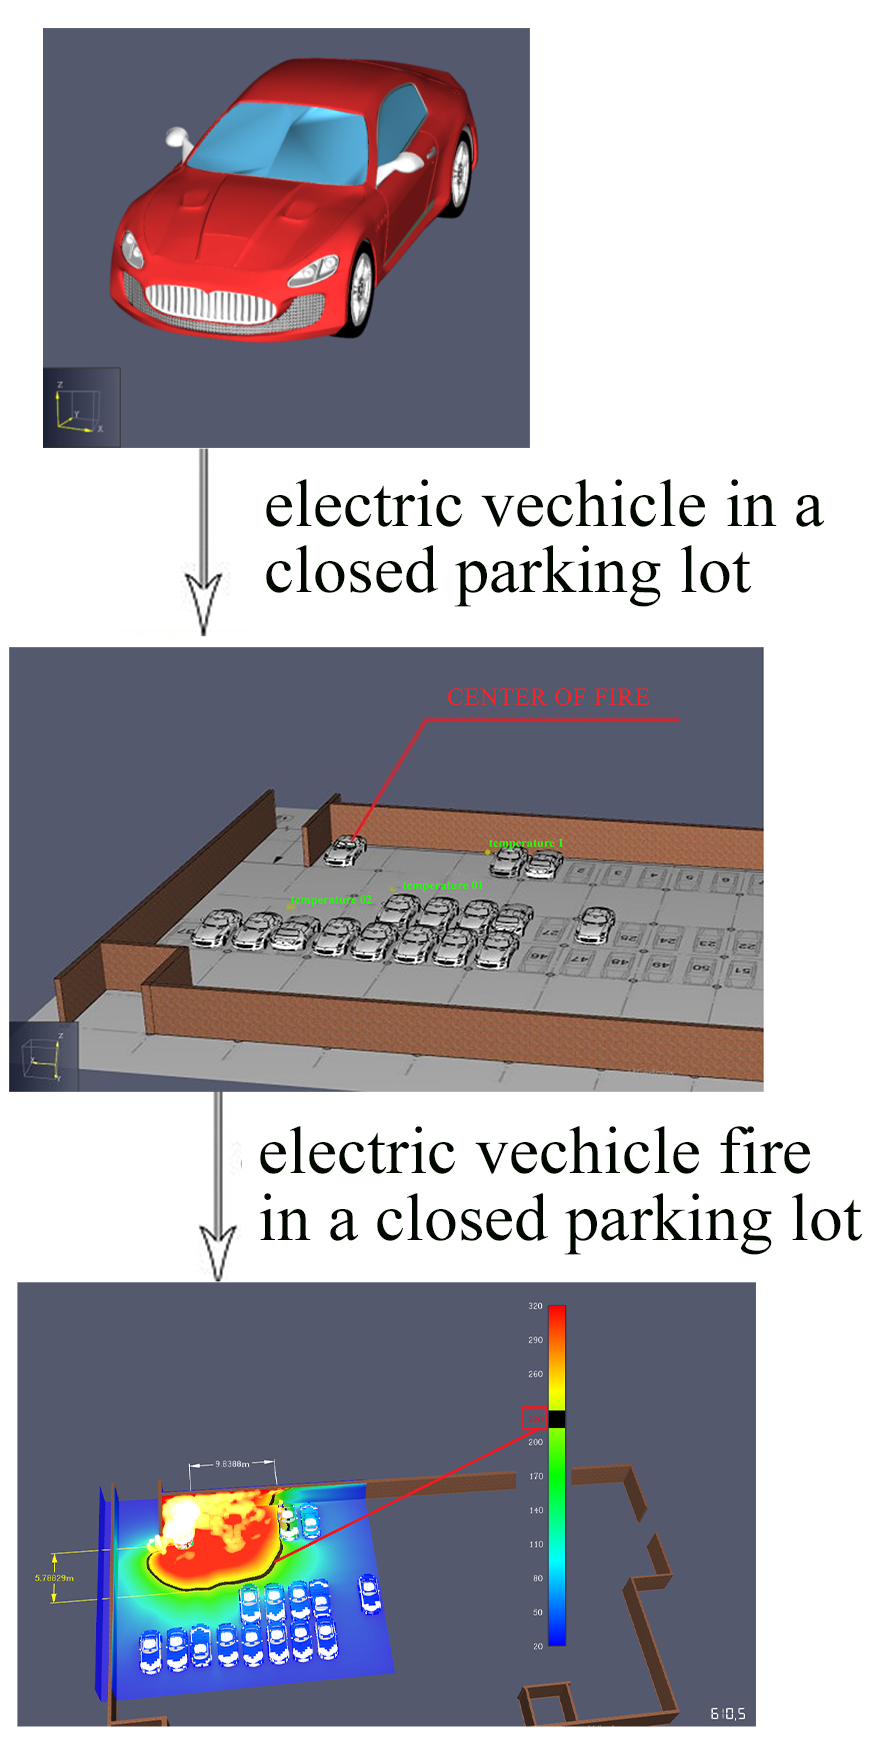 Determination of fire protection distances during a tesla model s fire in a closed parking lot